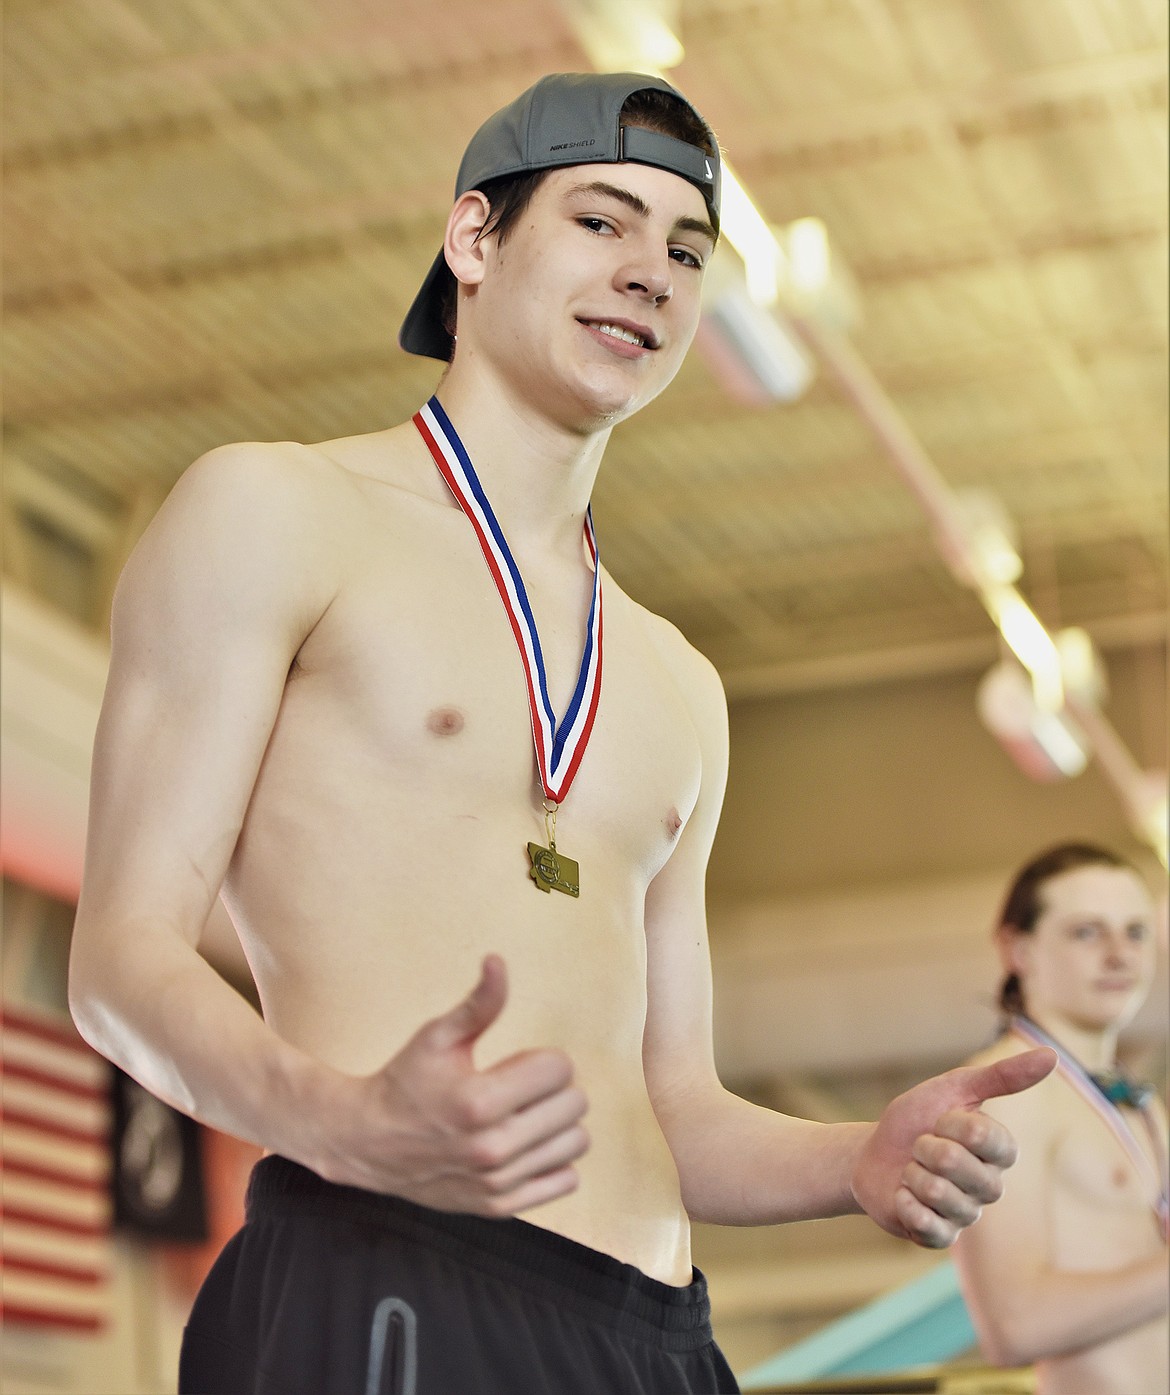 Whitefish's Logan Botner recieves a medal for a first-place finish in the 500 yard freestyle race at the Montana Class A State swim meet on Saturday, March 6 in Polson. (Scot Heisel/Lake County Leader)